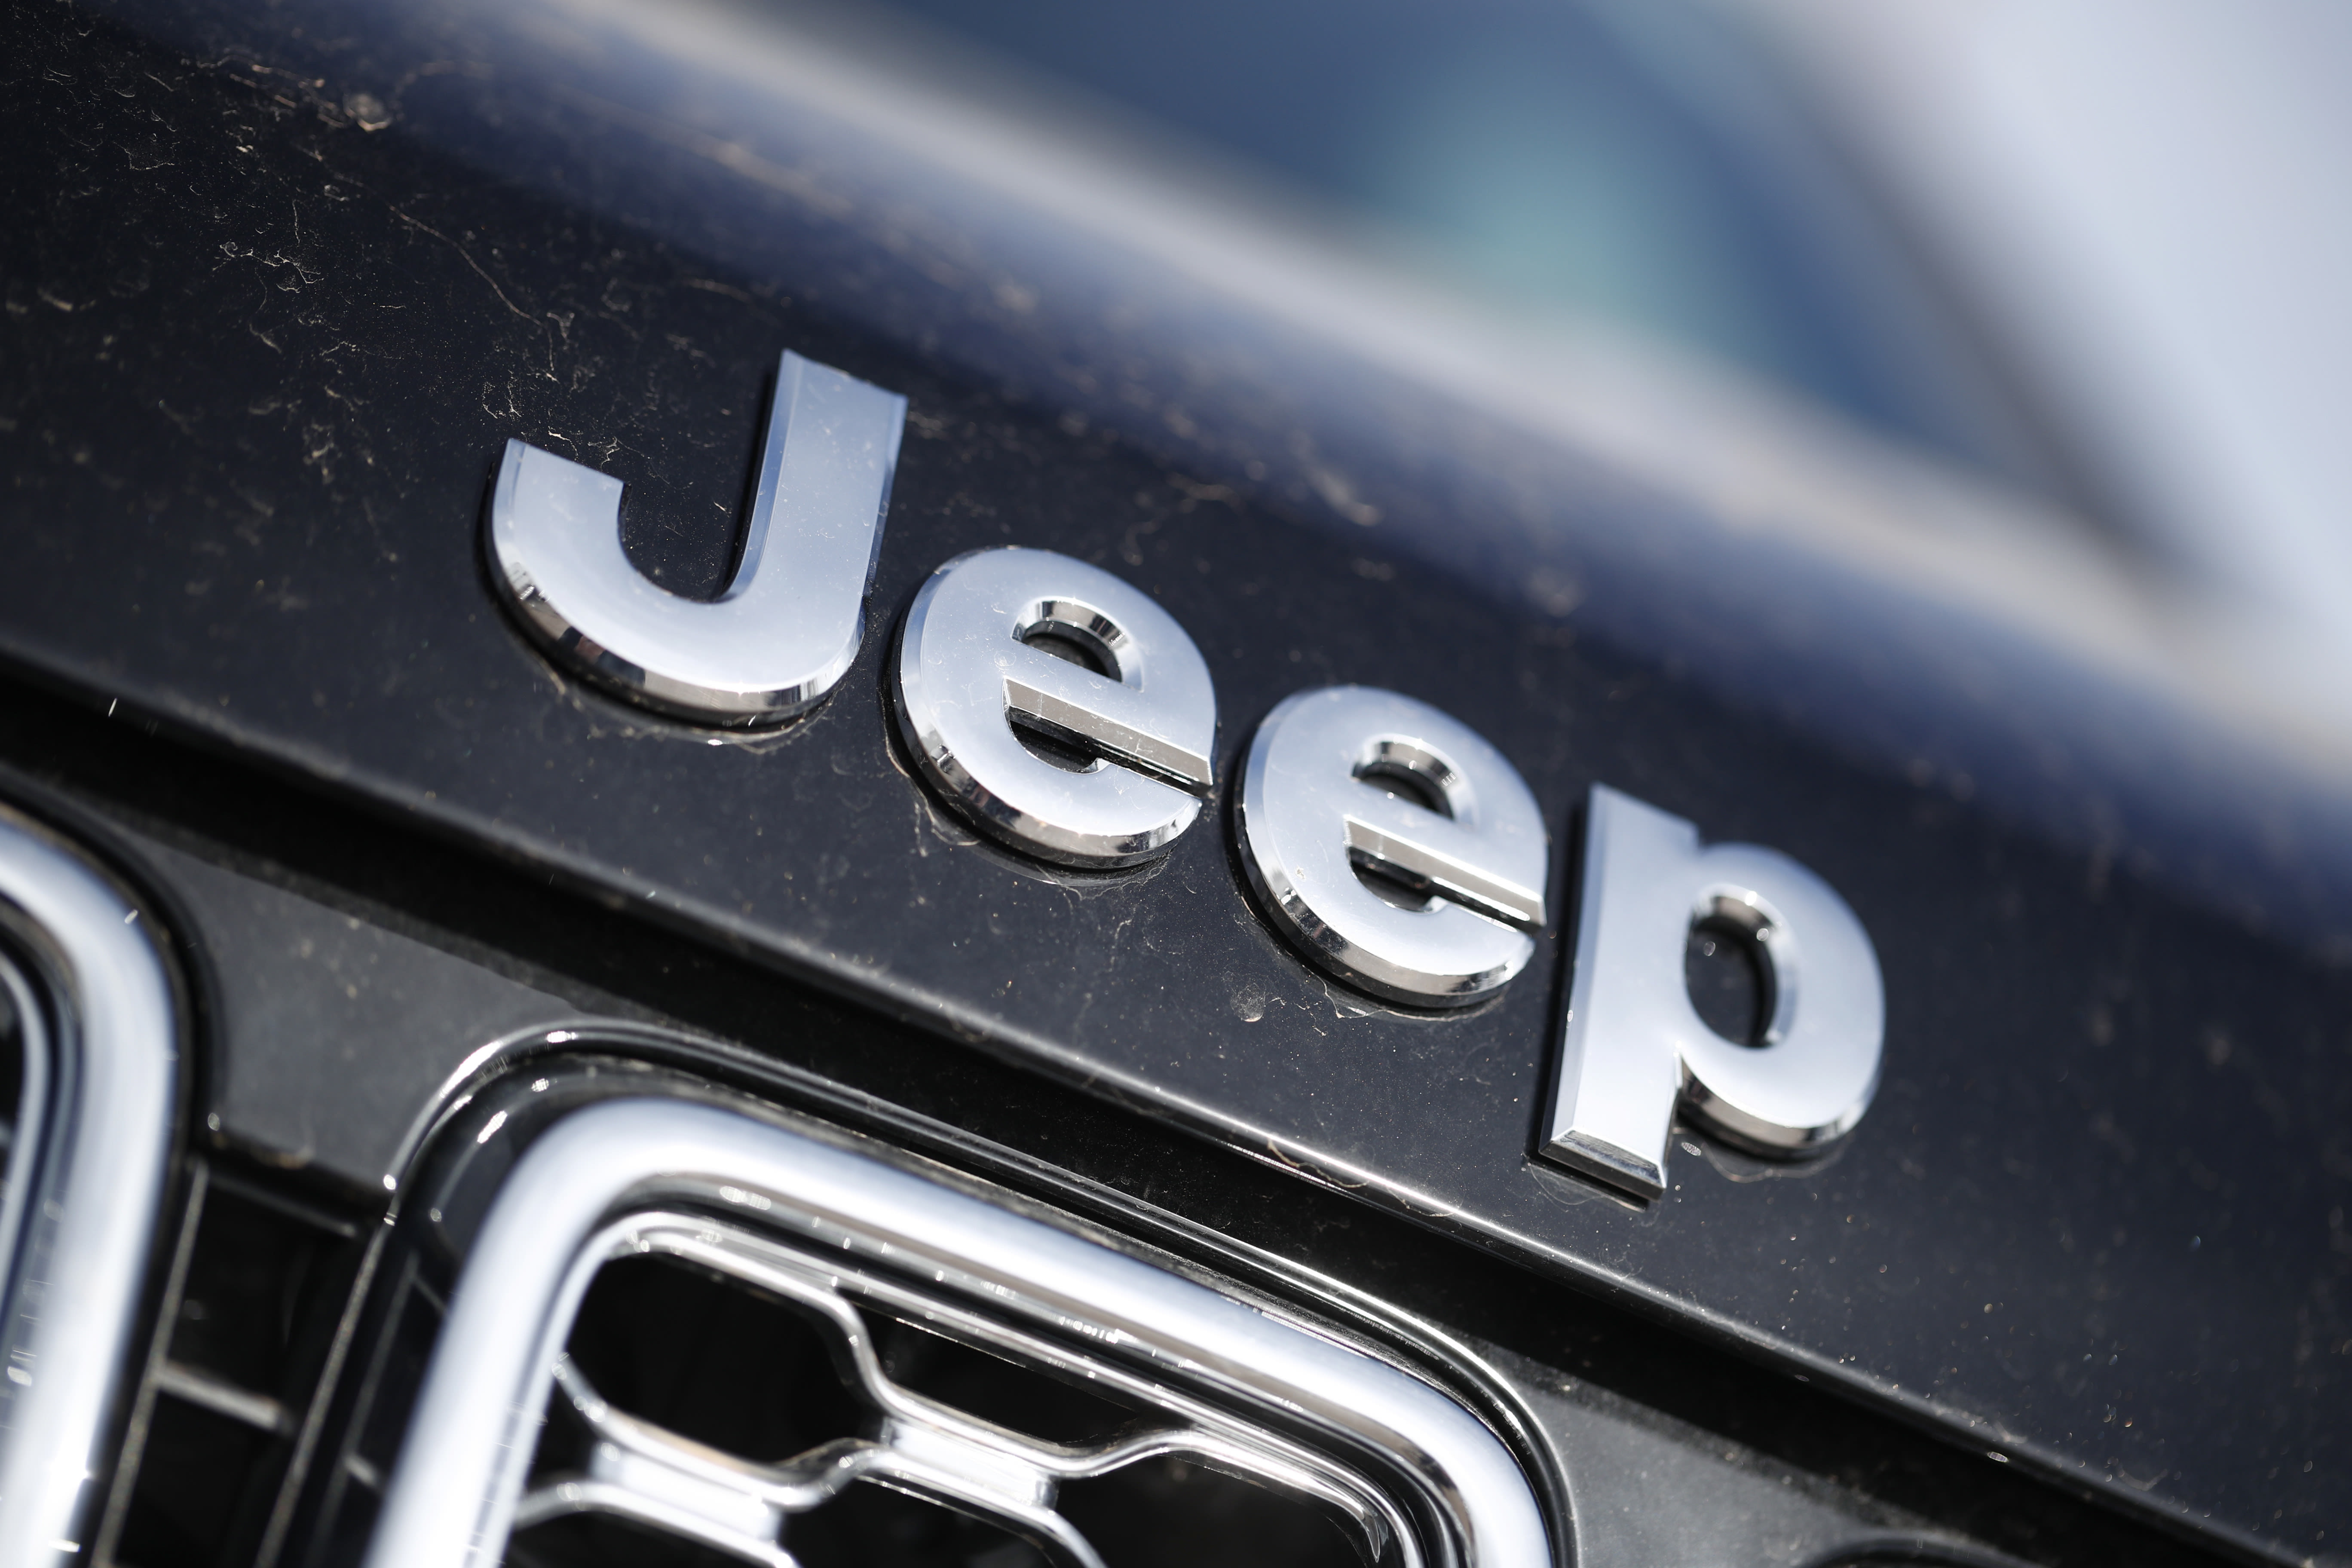 NHTSA launches recall query into 94,000 Jeep Wranglers as loss of motive power complaints continue